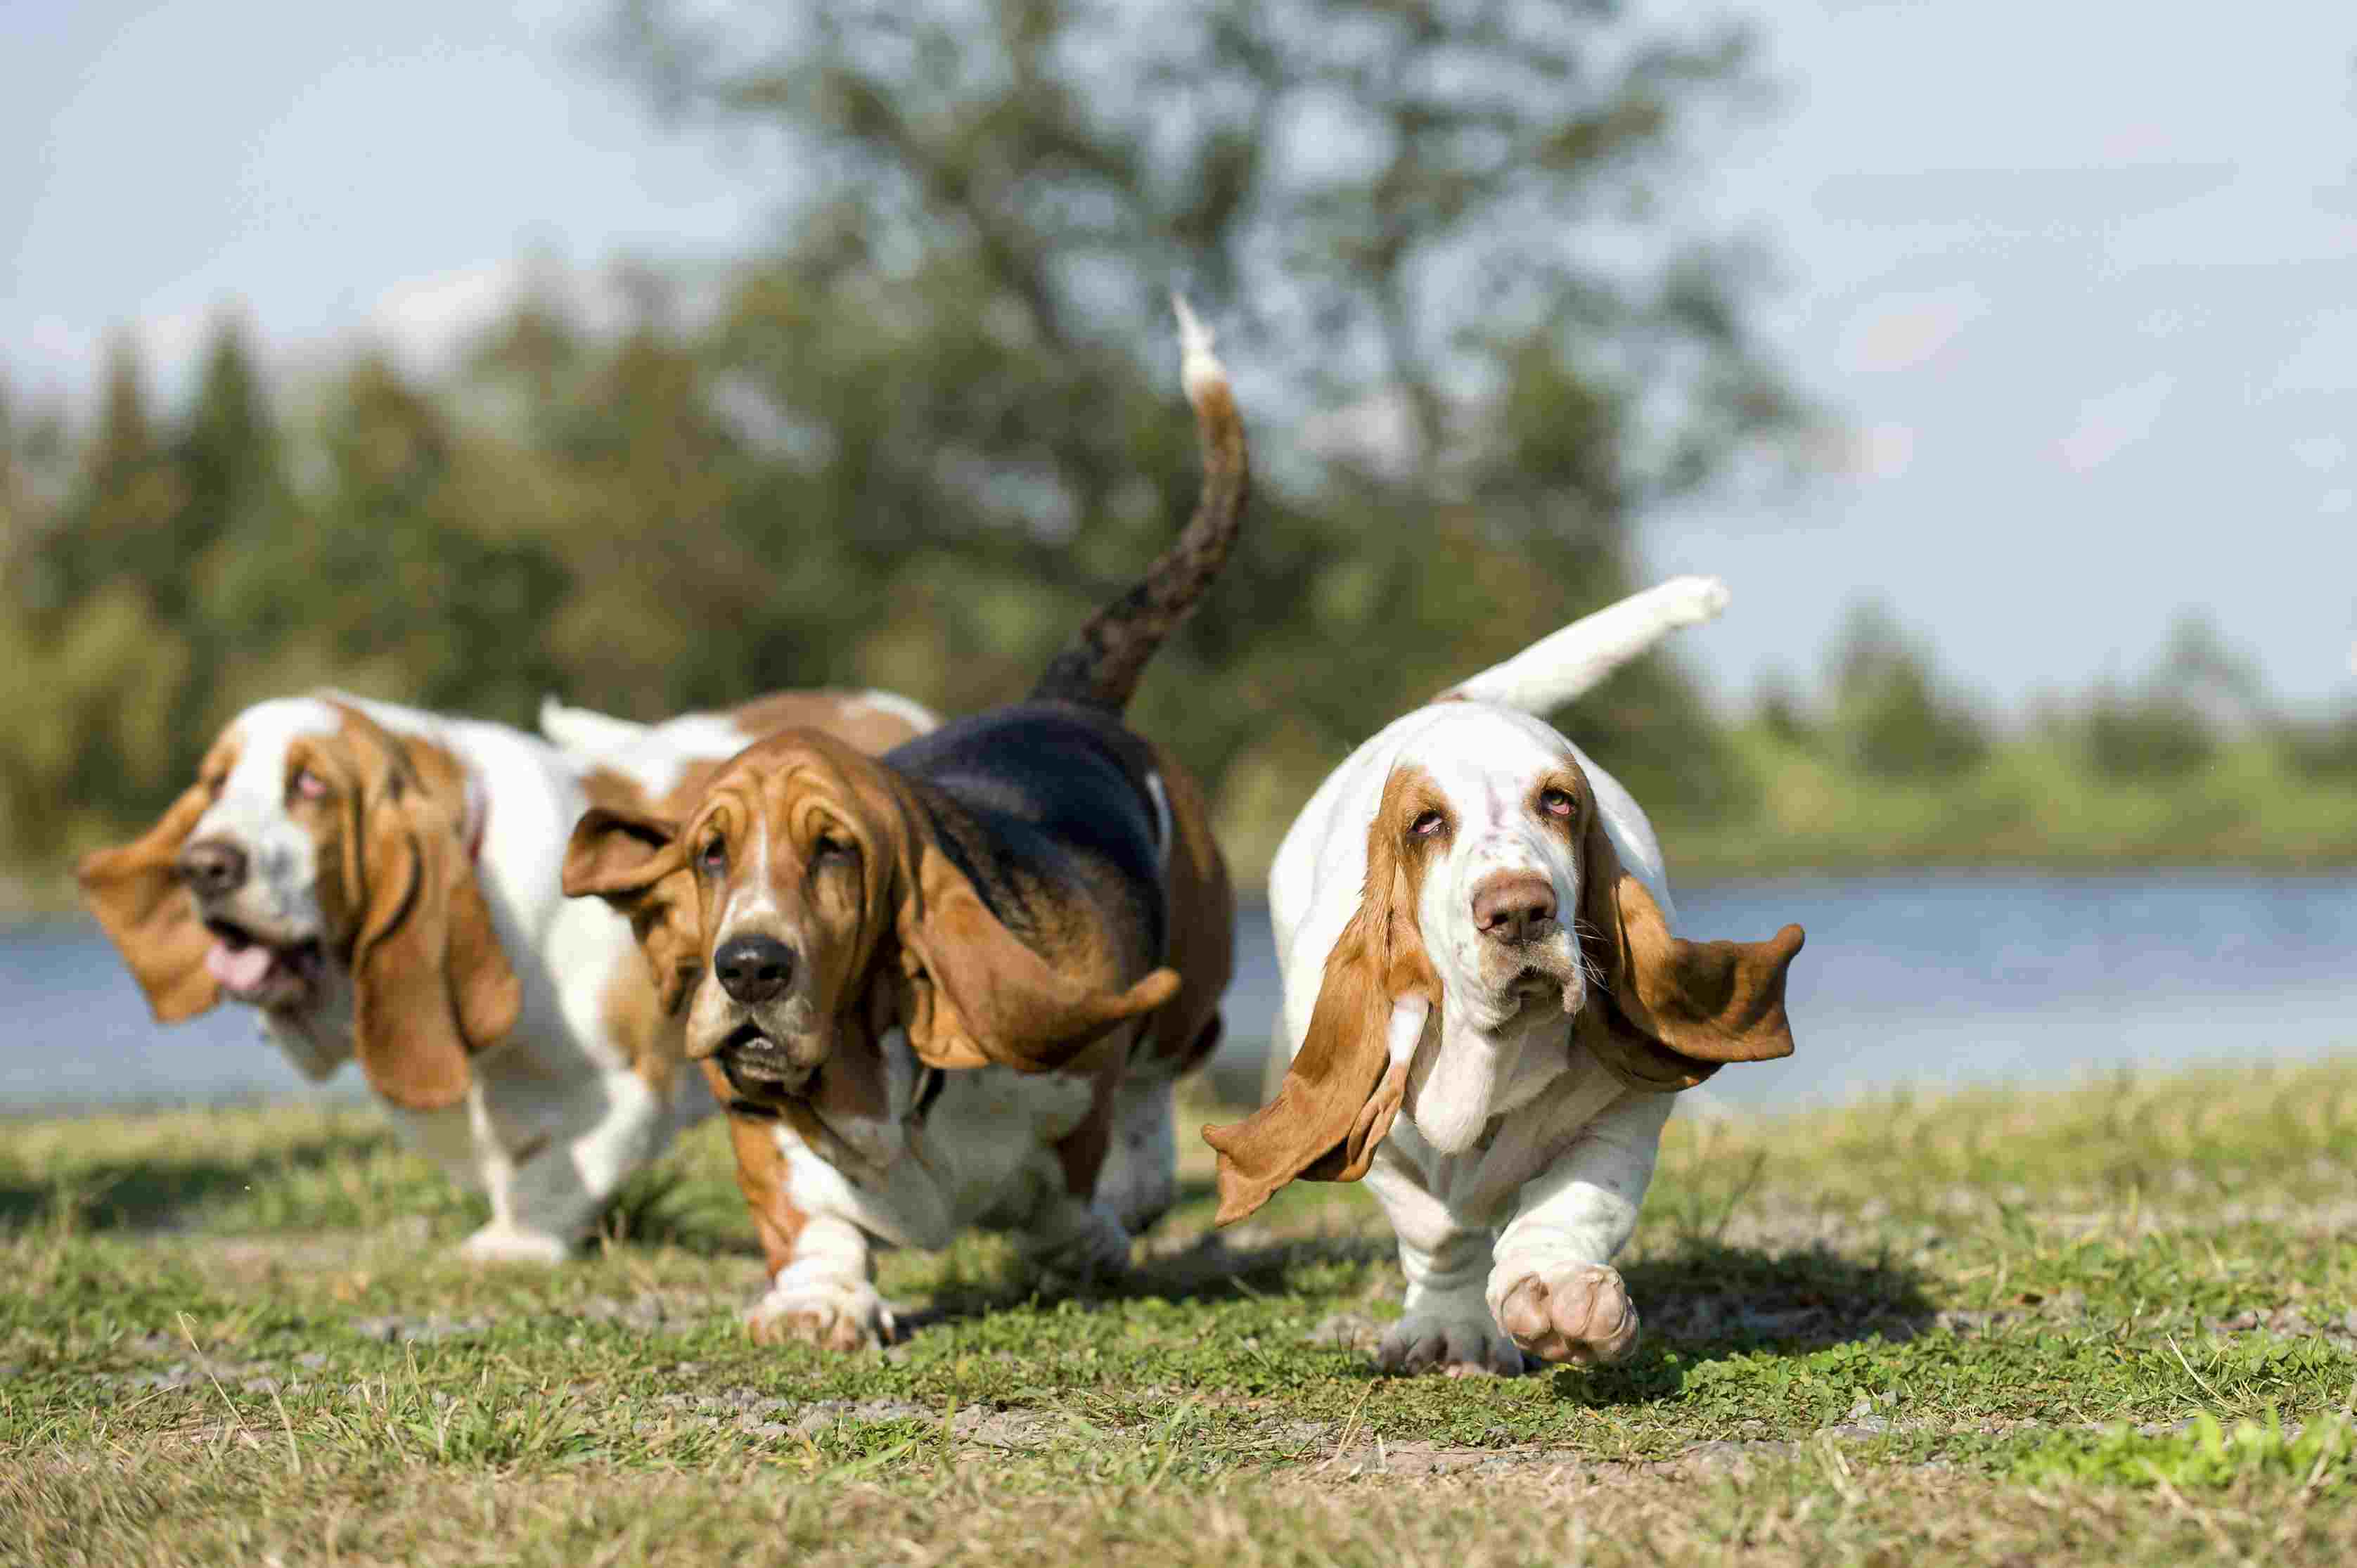 Obese basset hounds